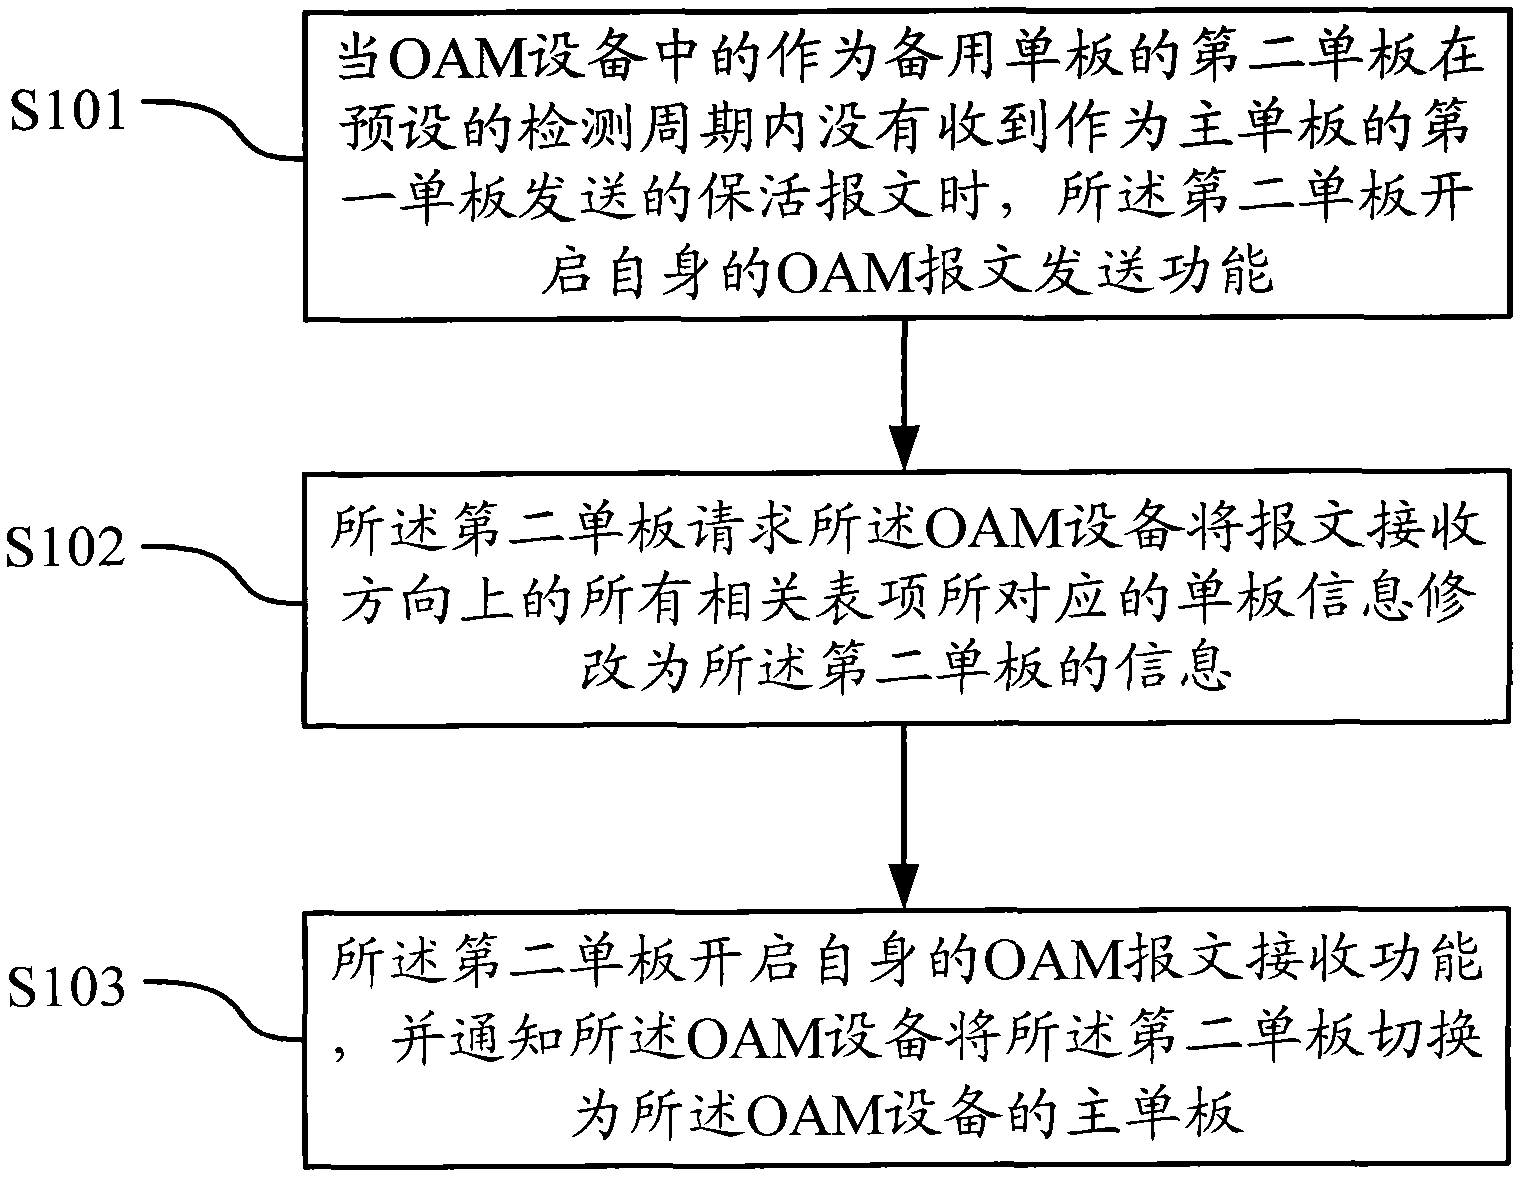 Method and device for preventing BFD (bidirectional forwarding detection) conversation interruption